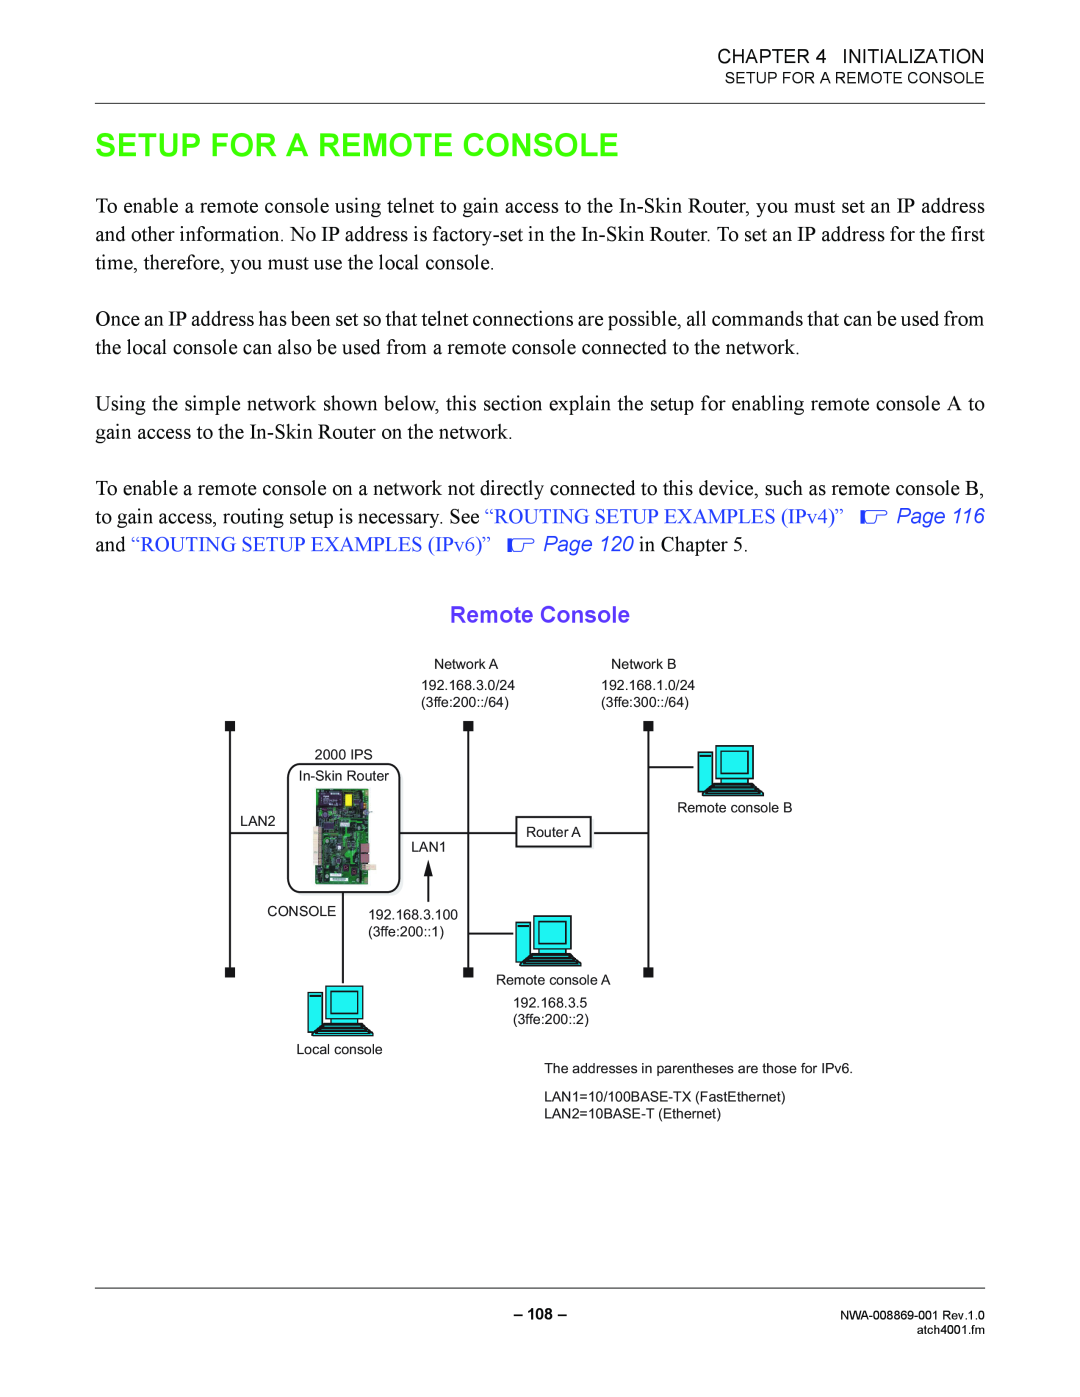 NEC NWA-008869-001 manual Setup For A Remote Console, and “ROUTING SETUP EXAMPLES IPv6” Page 120 in Chapter 